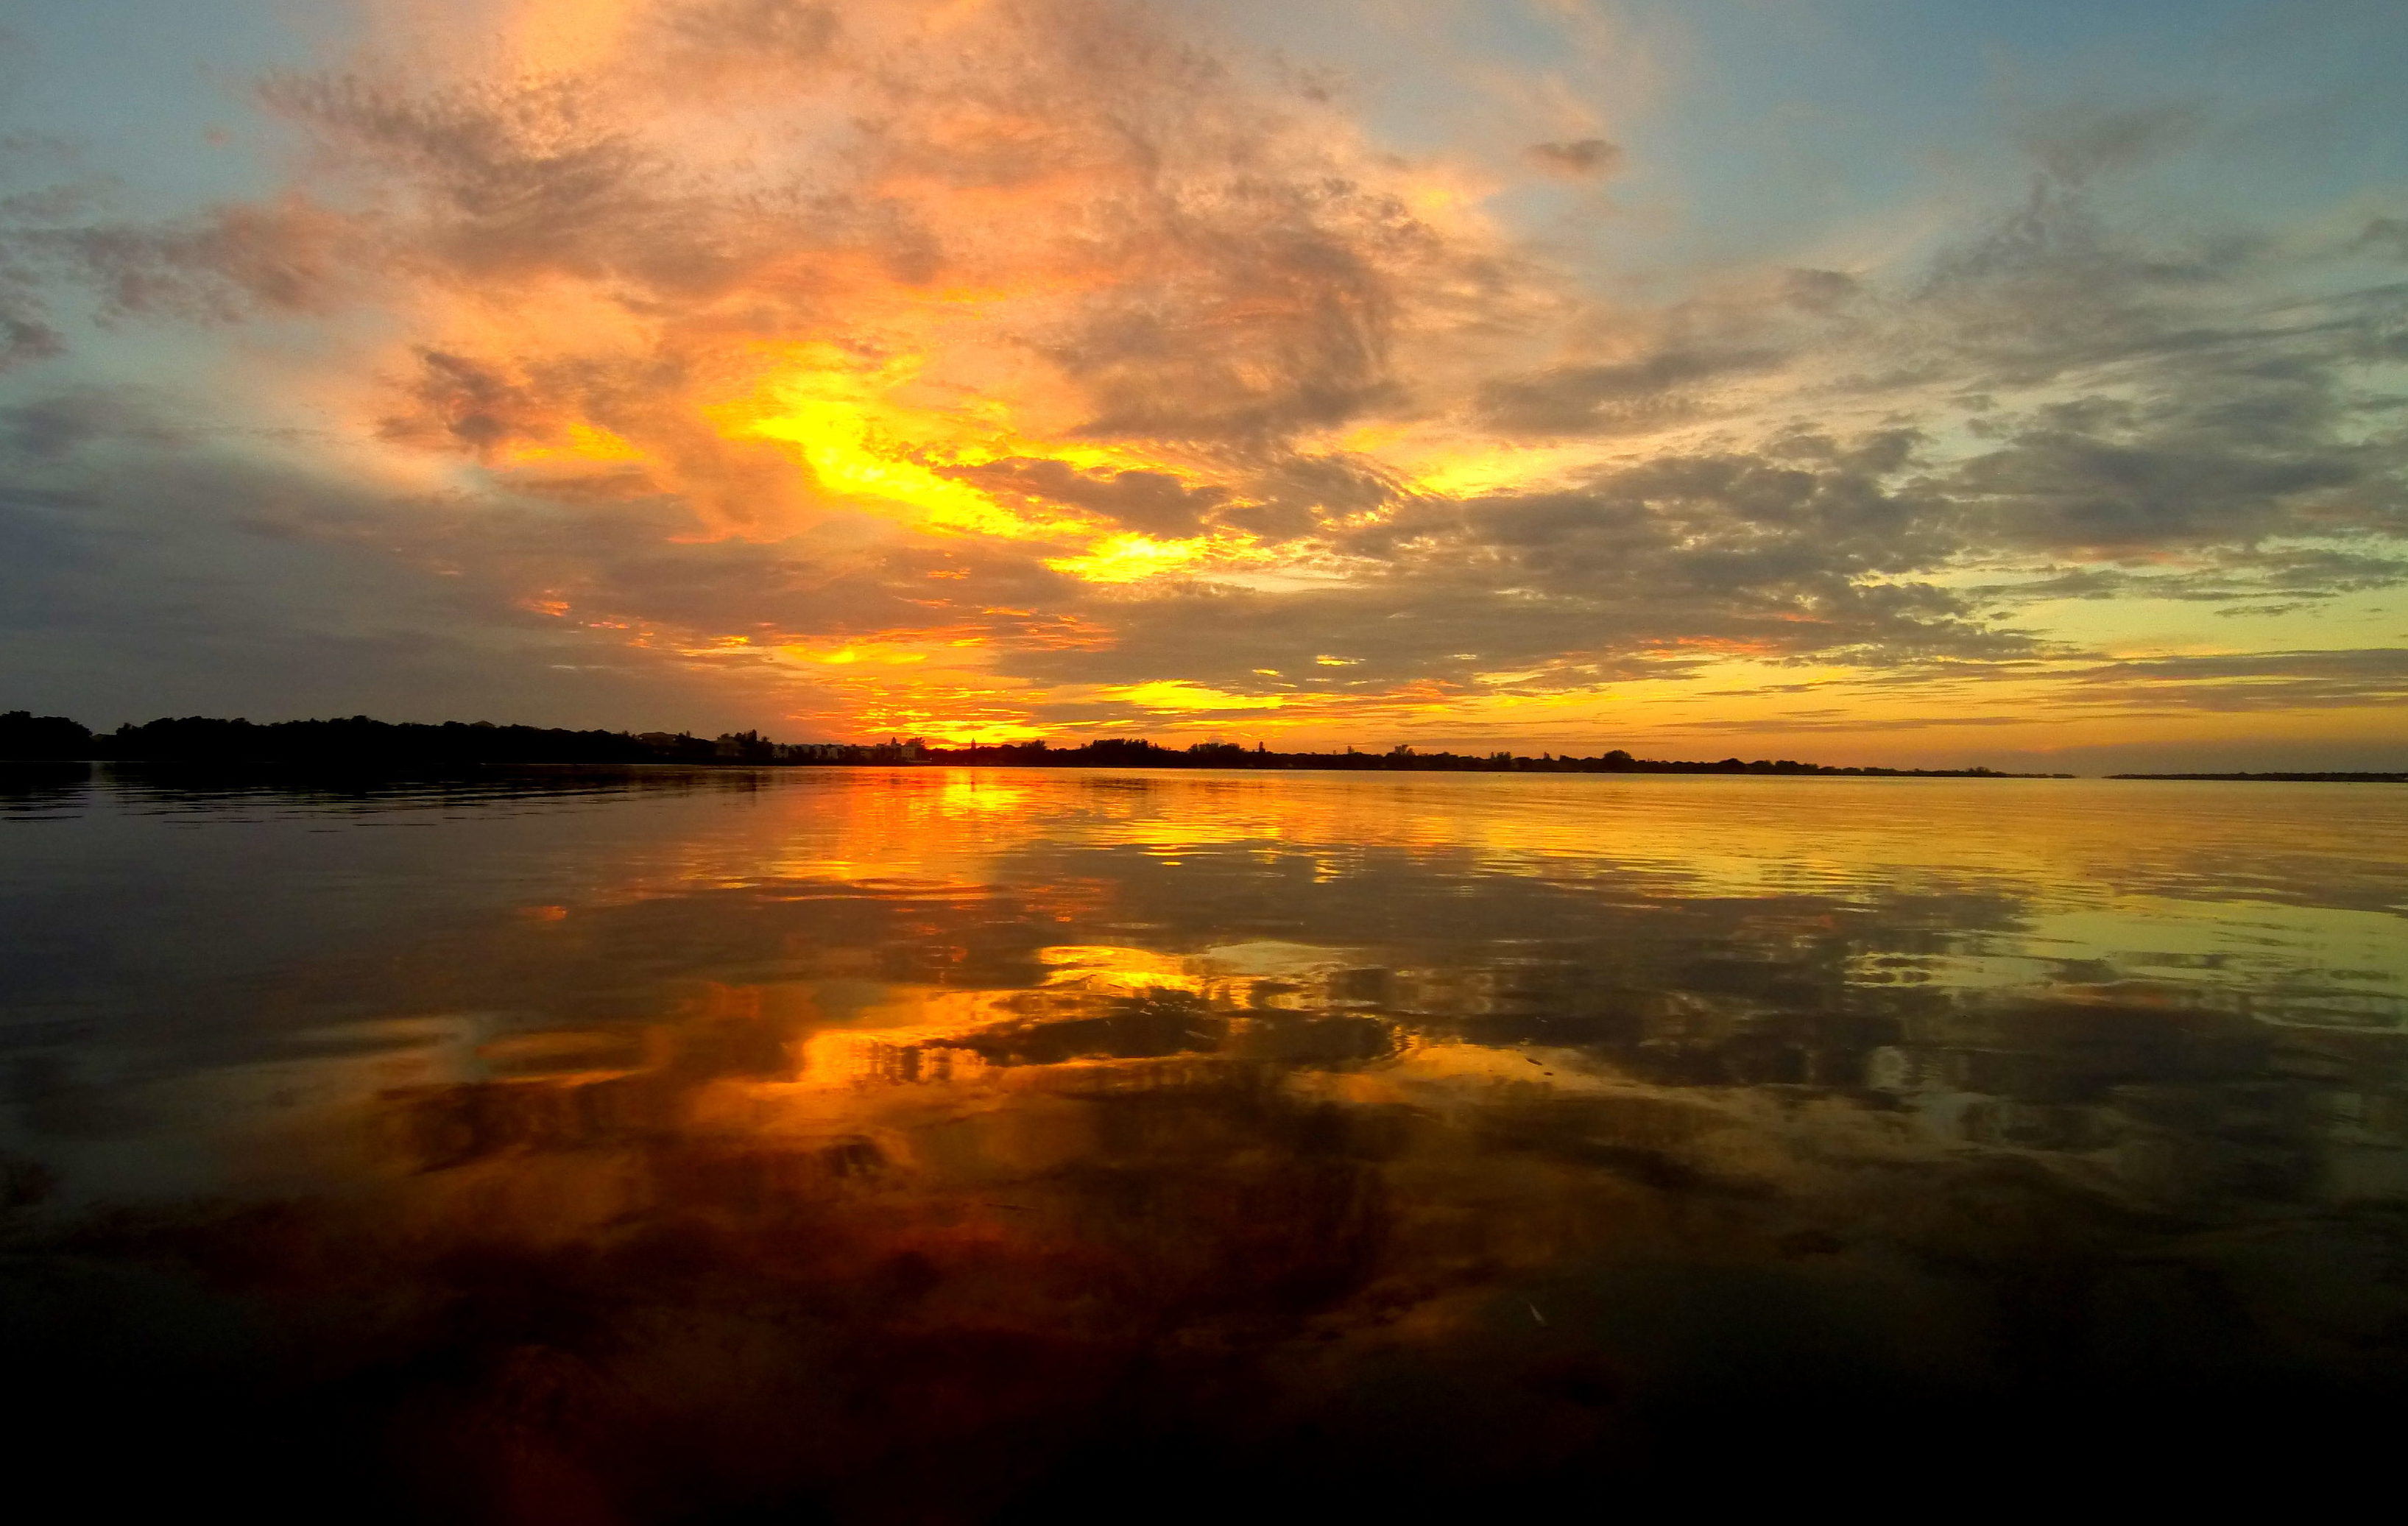 radiating orange and yellow clouds fill the sky and reflect off of the water as the as the sun sets.